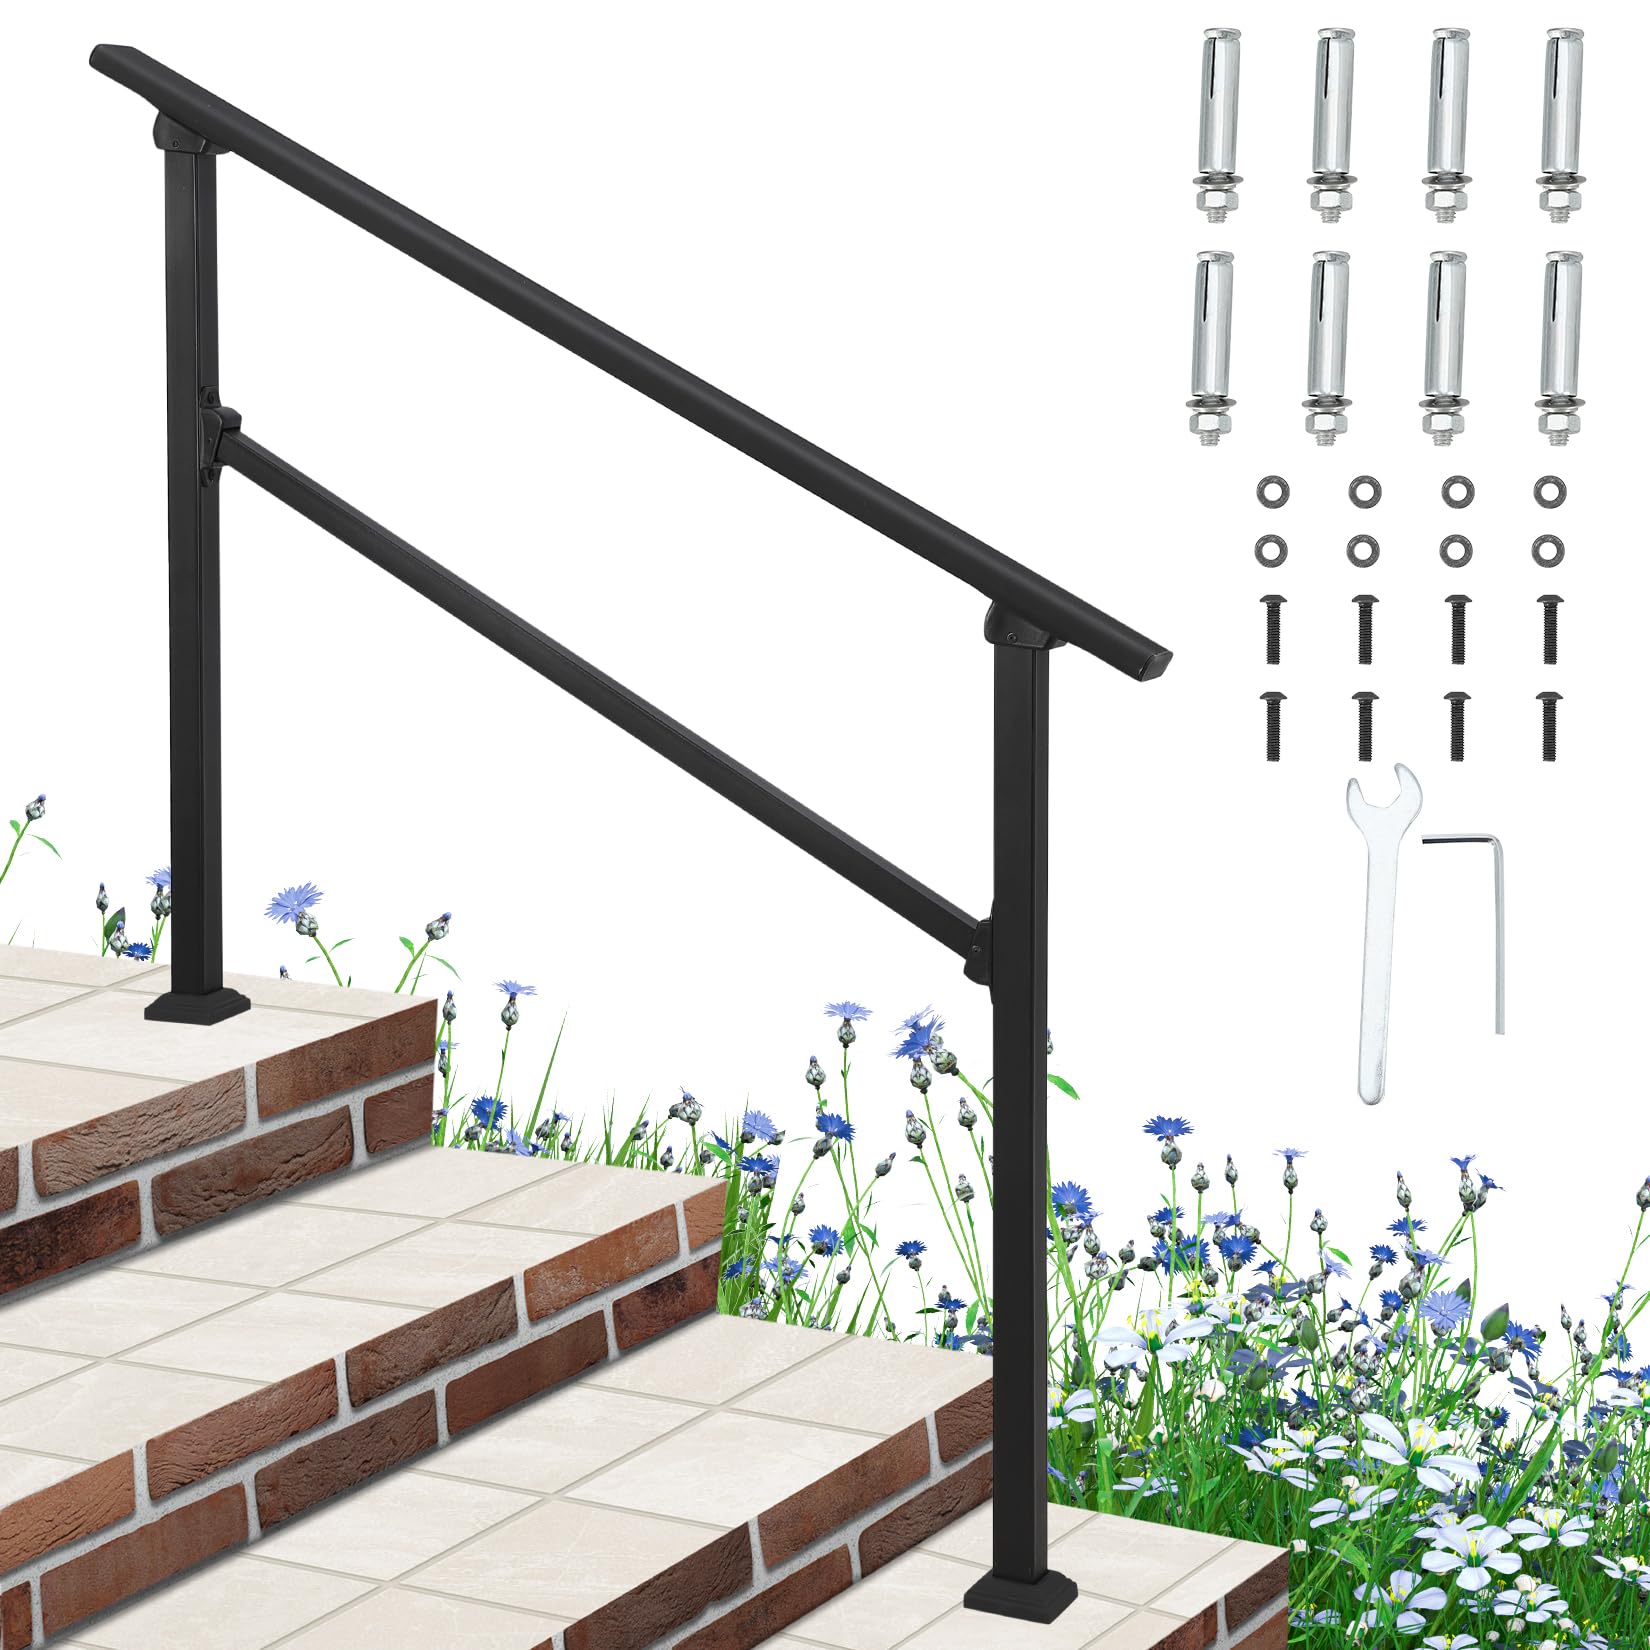 Handrails for Outdoor Steps, 3 Step Handrail Fit 2 or 3 Steps Outdoor Stair Railing, Metal Porch Railing, Deck Handrail, Aluminium Alloy Hand Rails kit for Concrete, Porch Steps